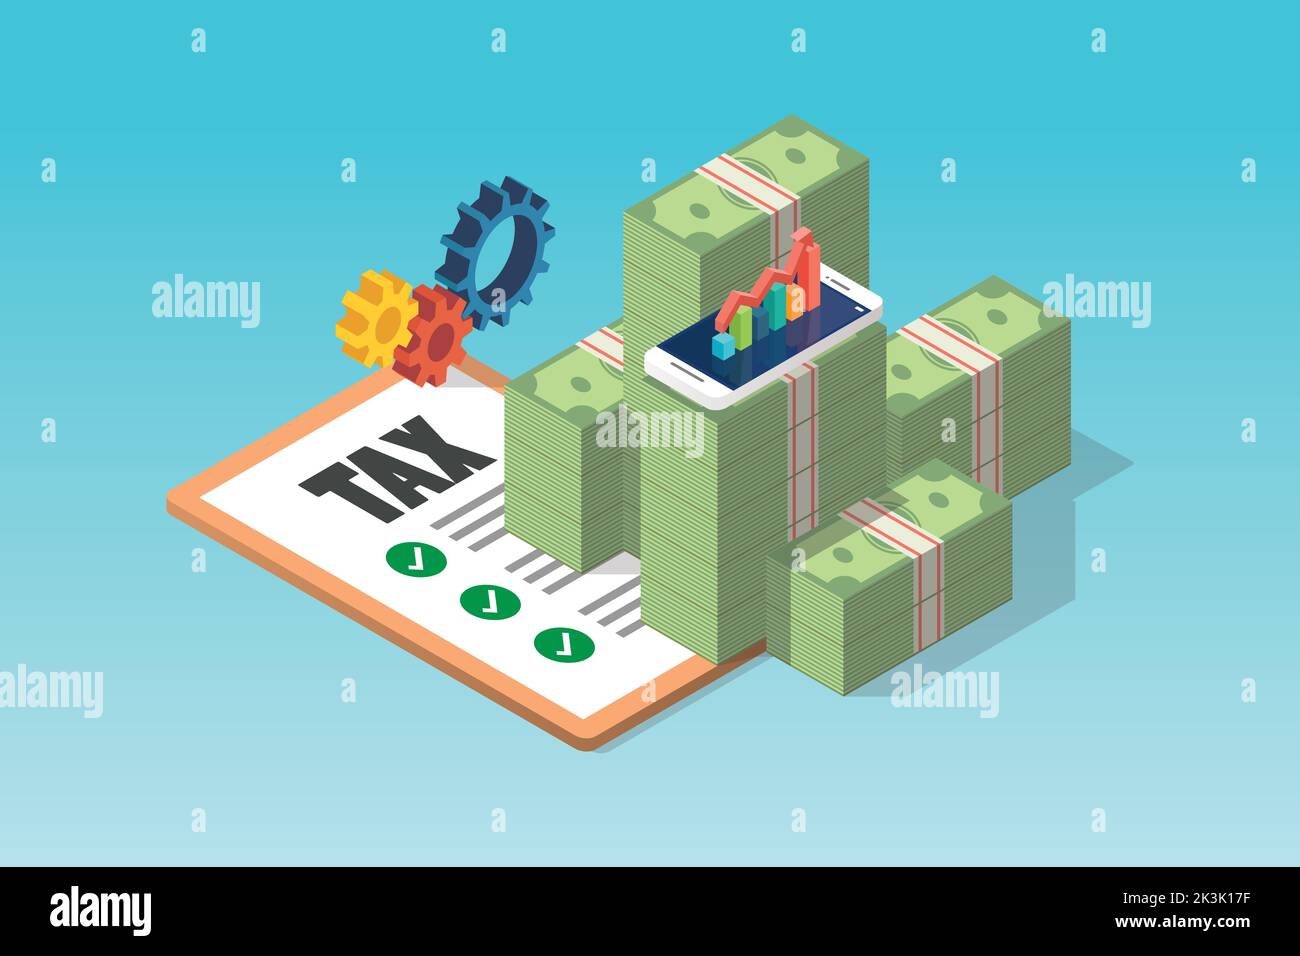 Isometric tax payment and business concept. Vector illustration Stock Vector